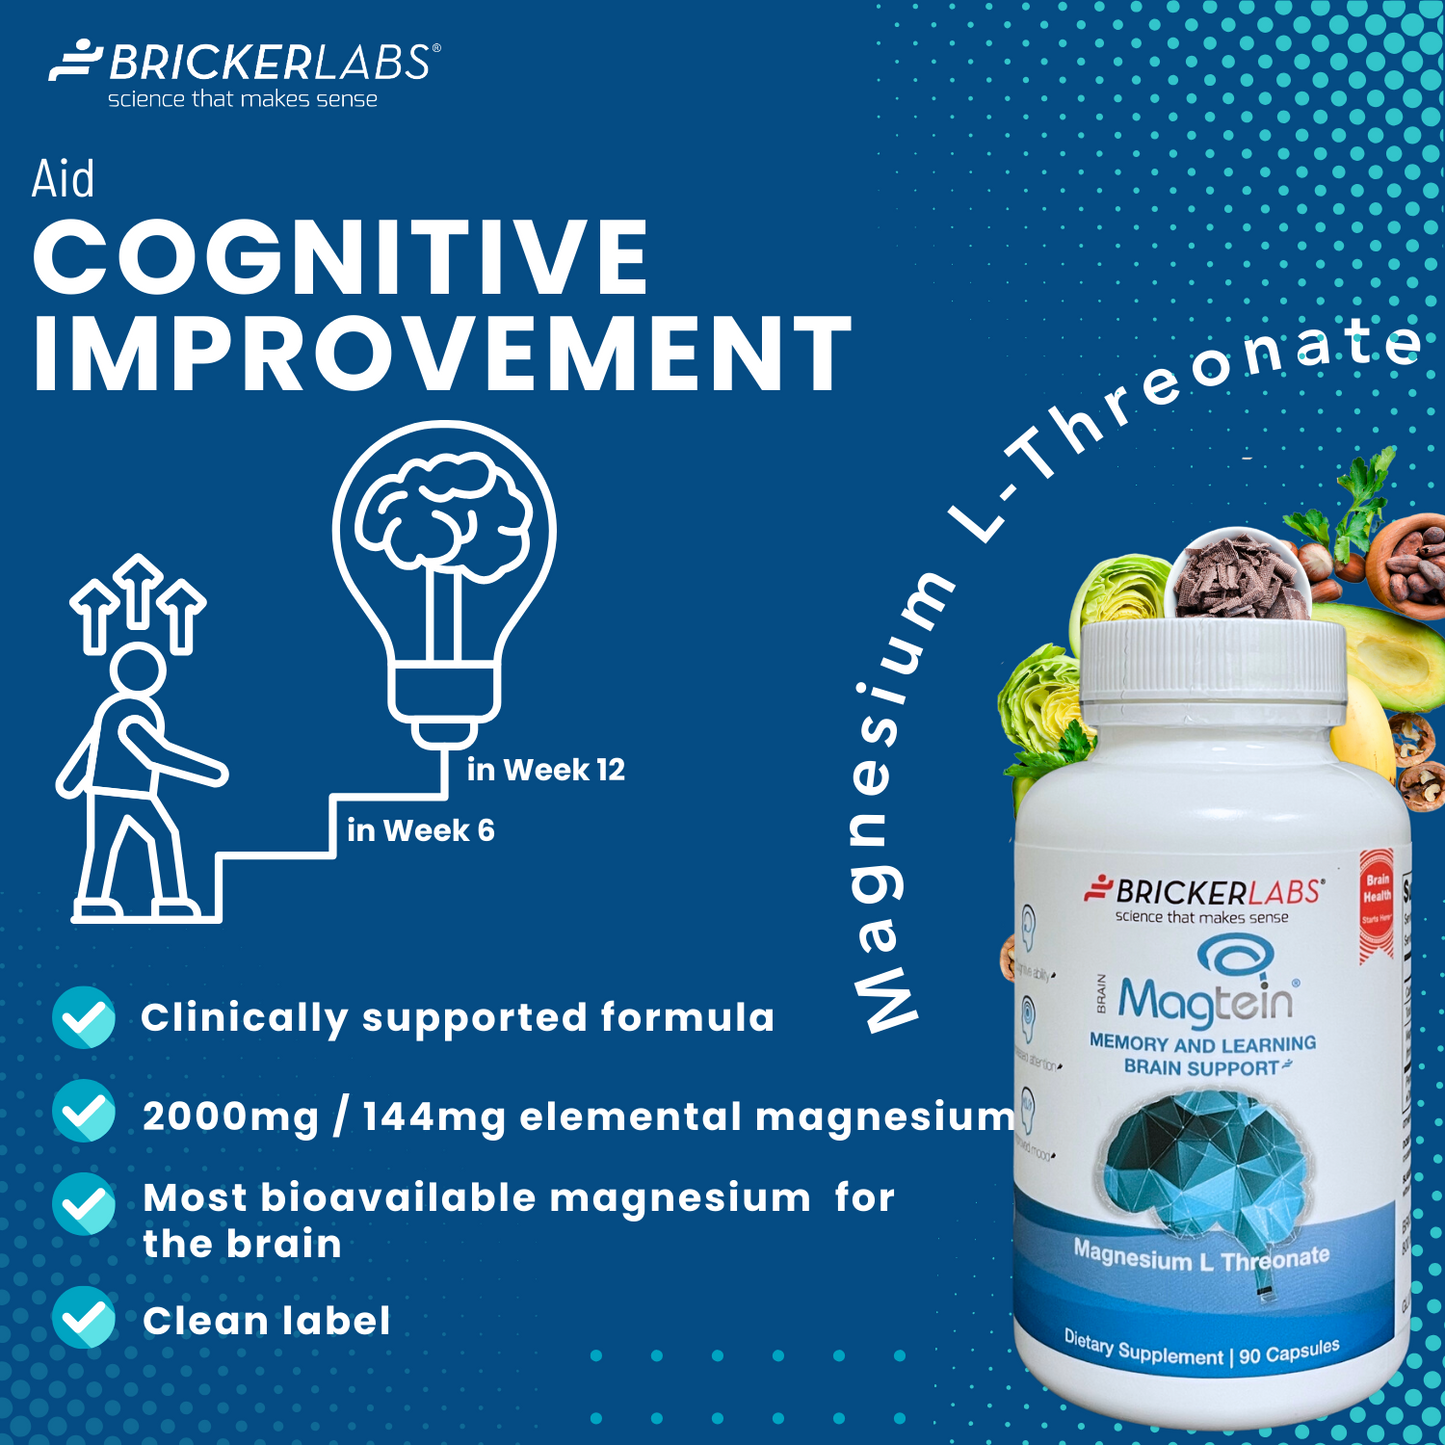 MAGTEIN® │Magnesium L Threonate - Memory and Learning Brain Health Supplement